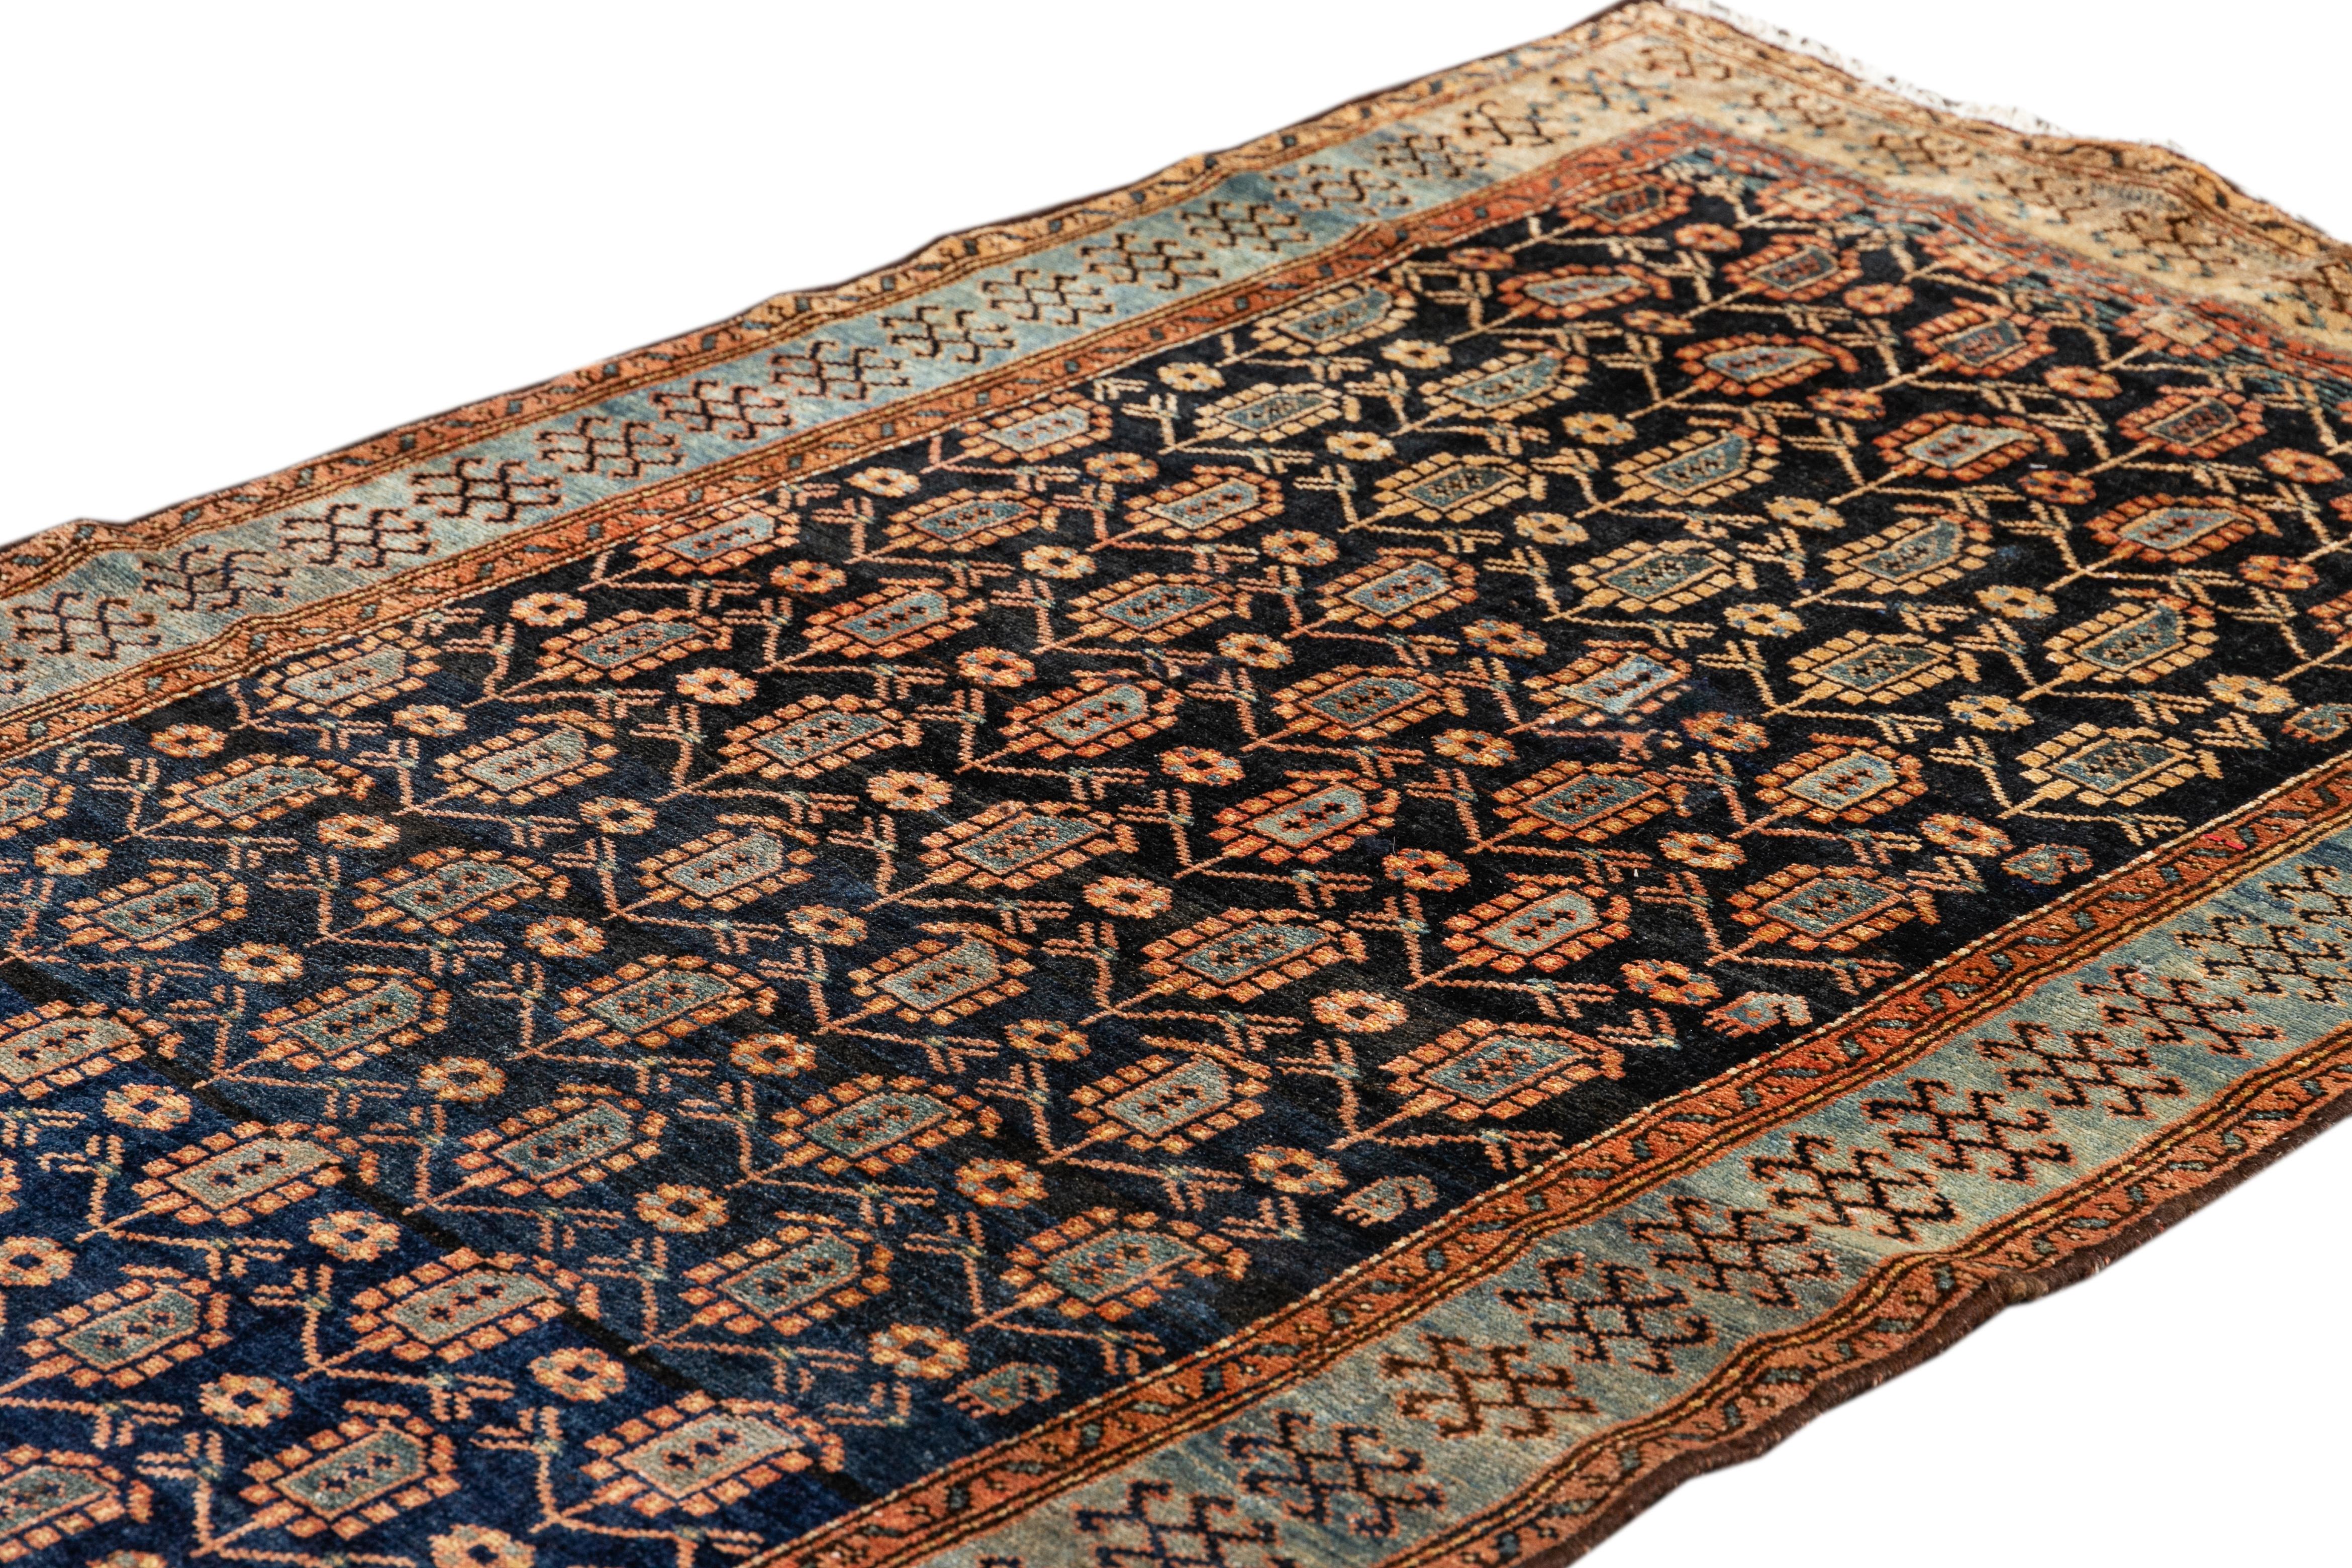 Beautiful antique Malayer Persian runner rug with a dark blue field. This piece has gray and rust accents with an all-over geometric floral design. 

This rug measures: 3'8